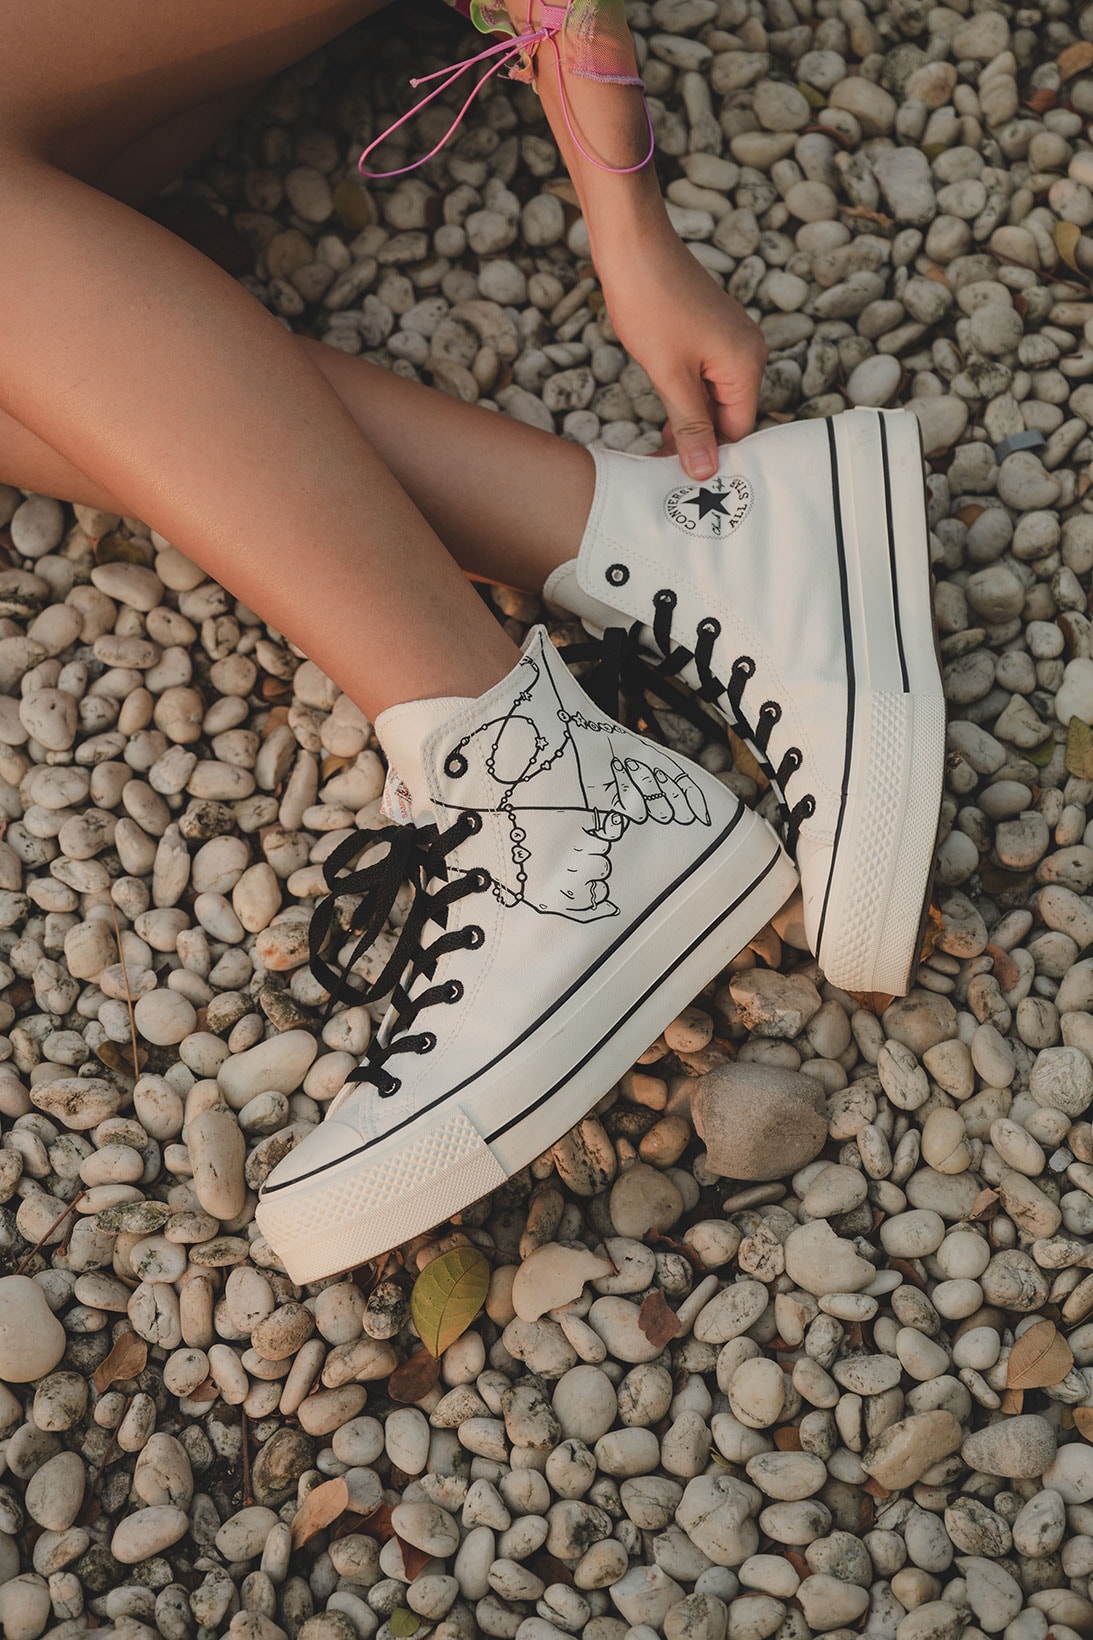 converse by you millie bobby brown pauline wattanodom artist chuck taylor all star high top platform sneakers collaboration white